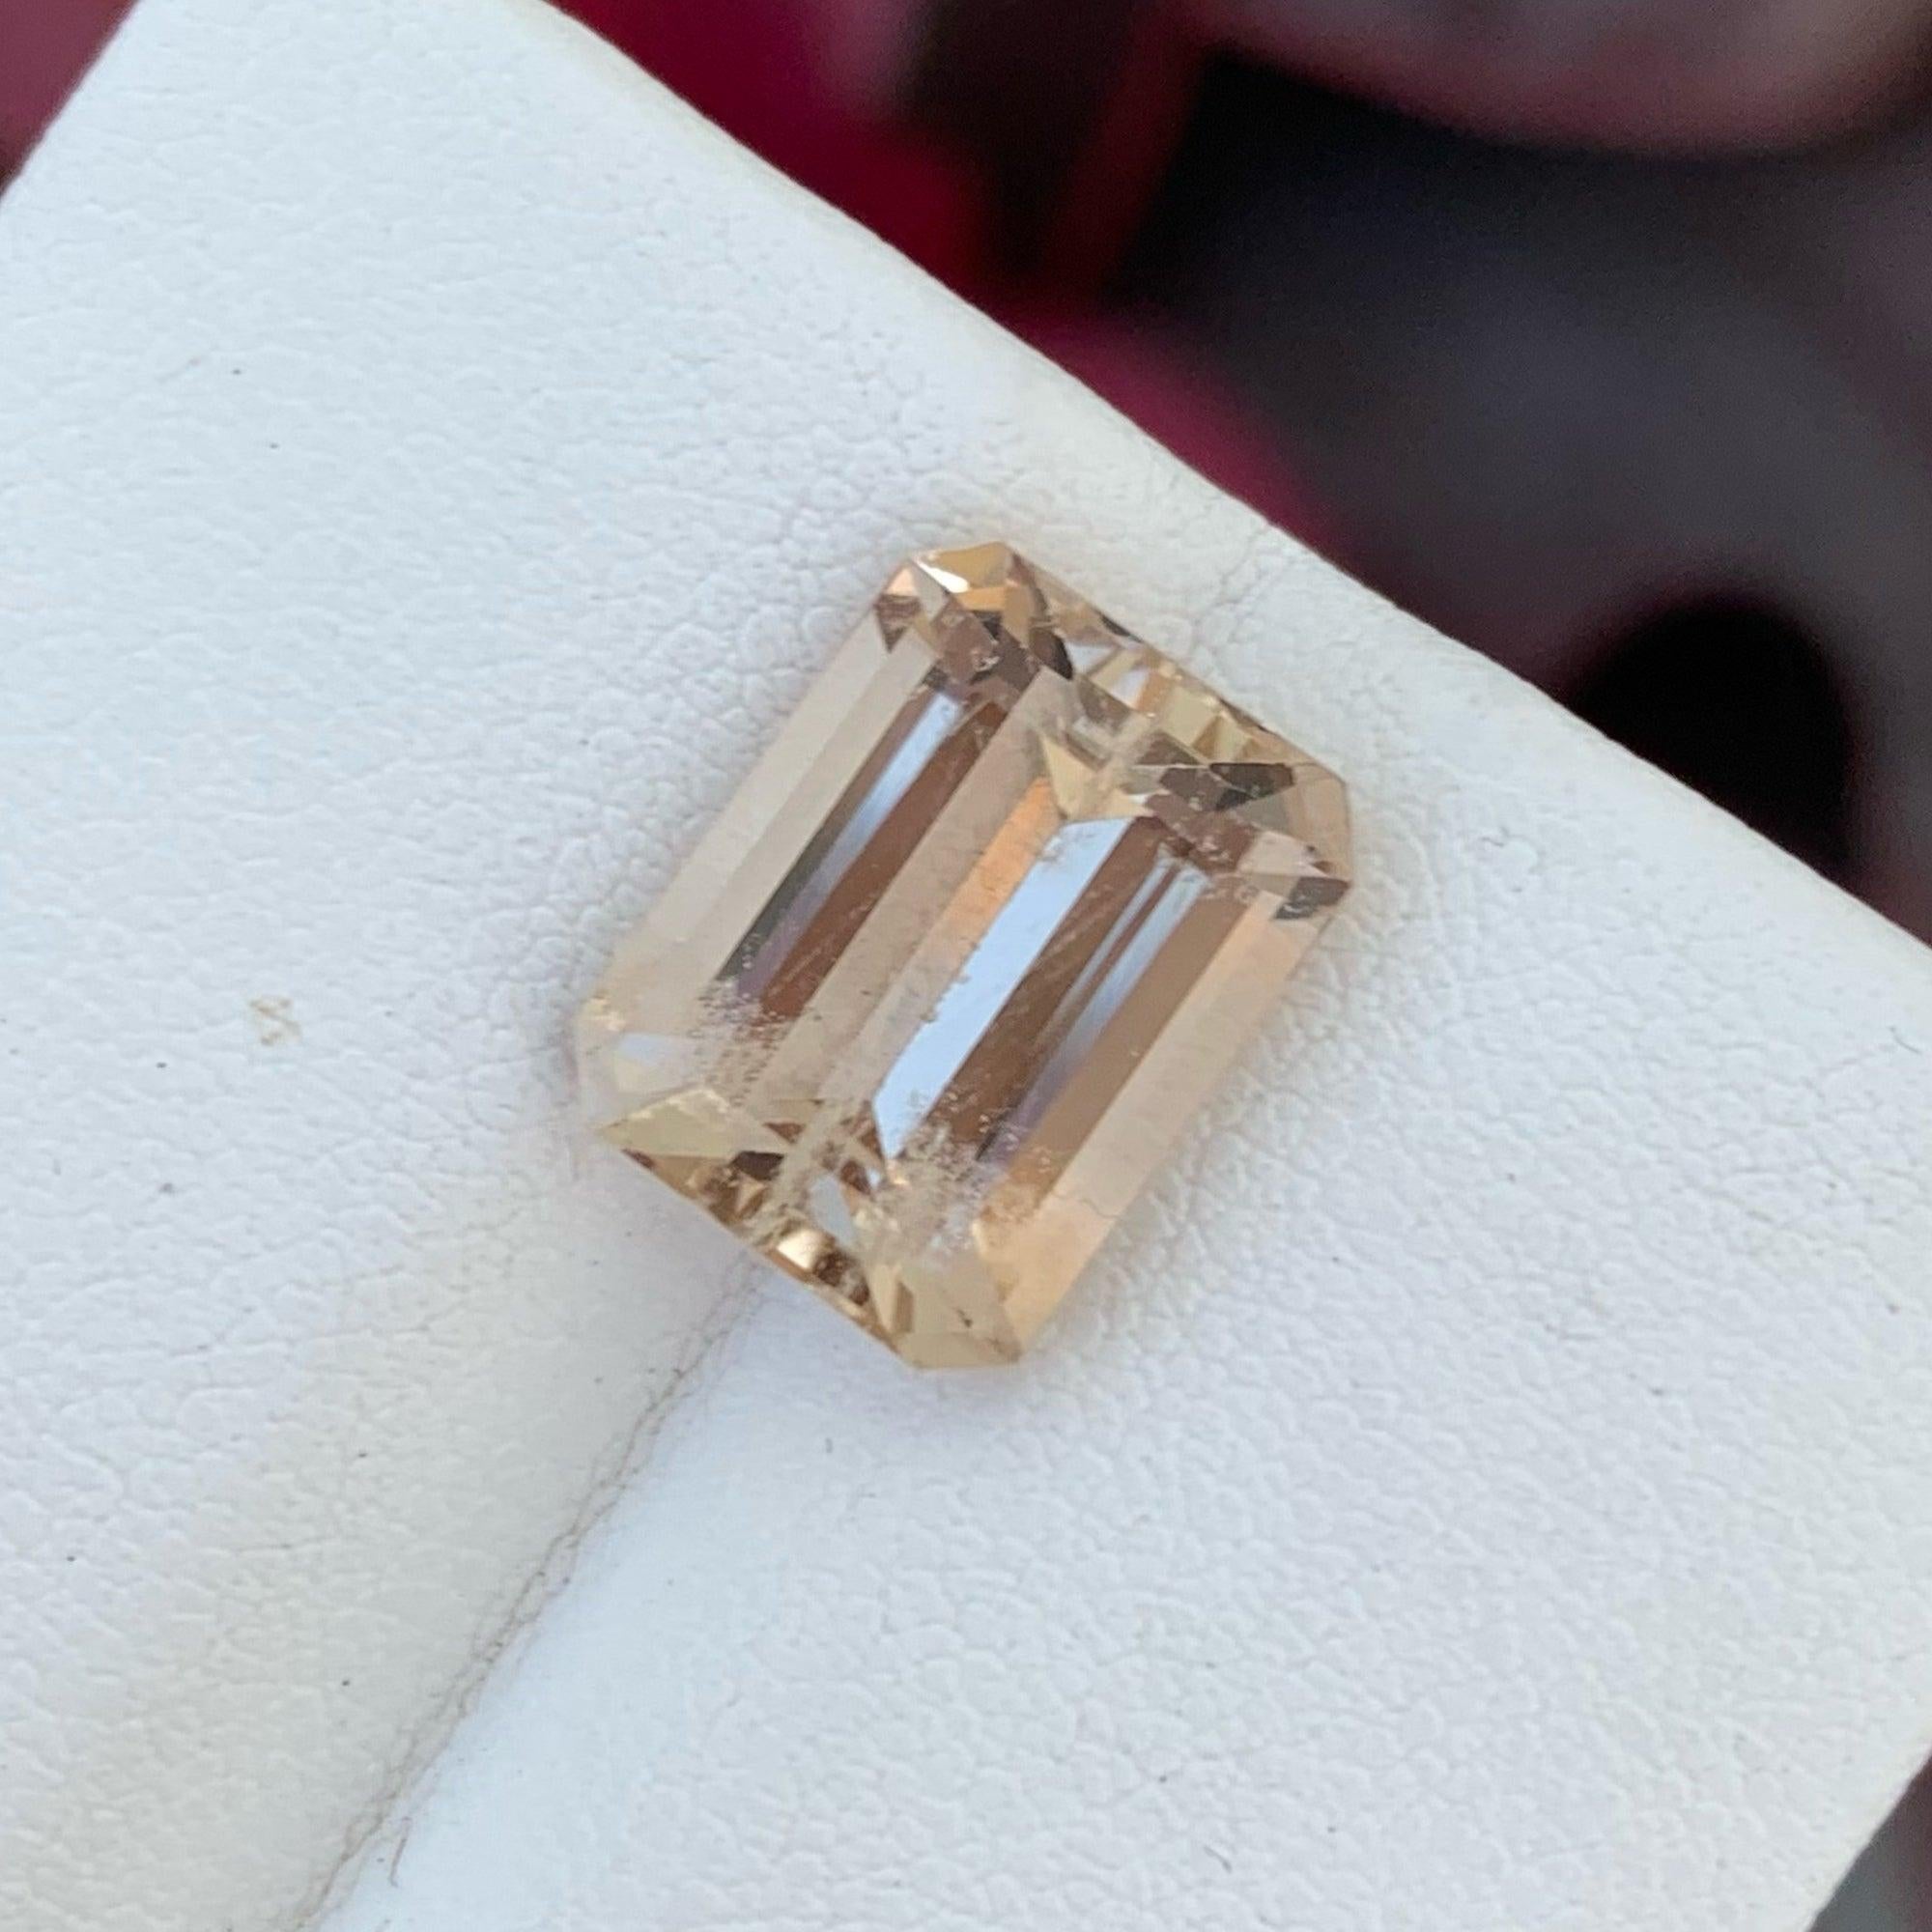 Imperial Natural Topaz For Ring, available For Sale At Wholesale Price Natural High Quality 7.15 Carats SI Clean Clarity Natural Loose Topaz From Pakistan. 
Product Information:
GEMSTONE NAME: Imperial Natural Topaz For Ring
WEIGHT: 7.15